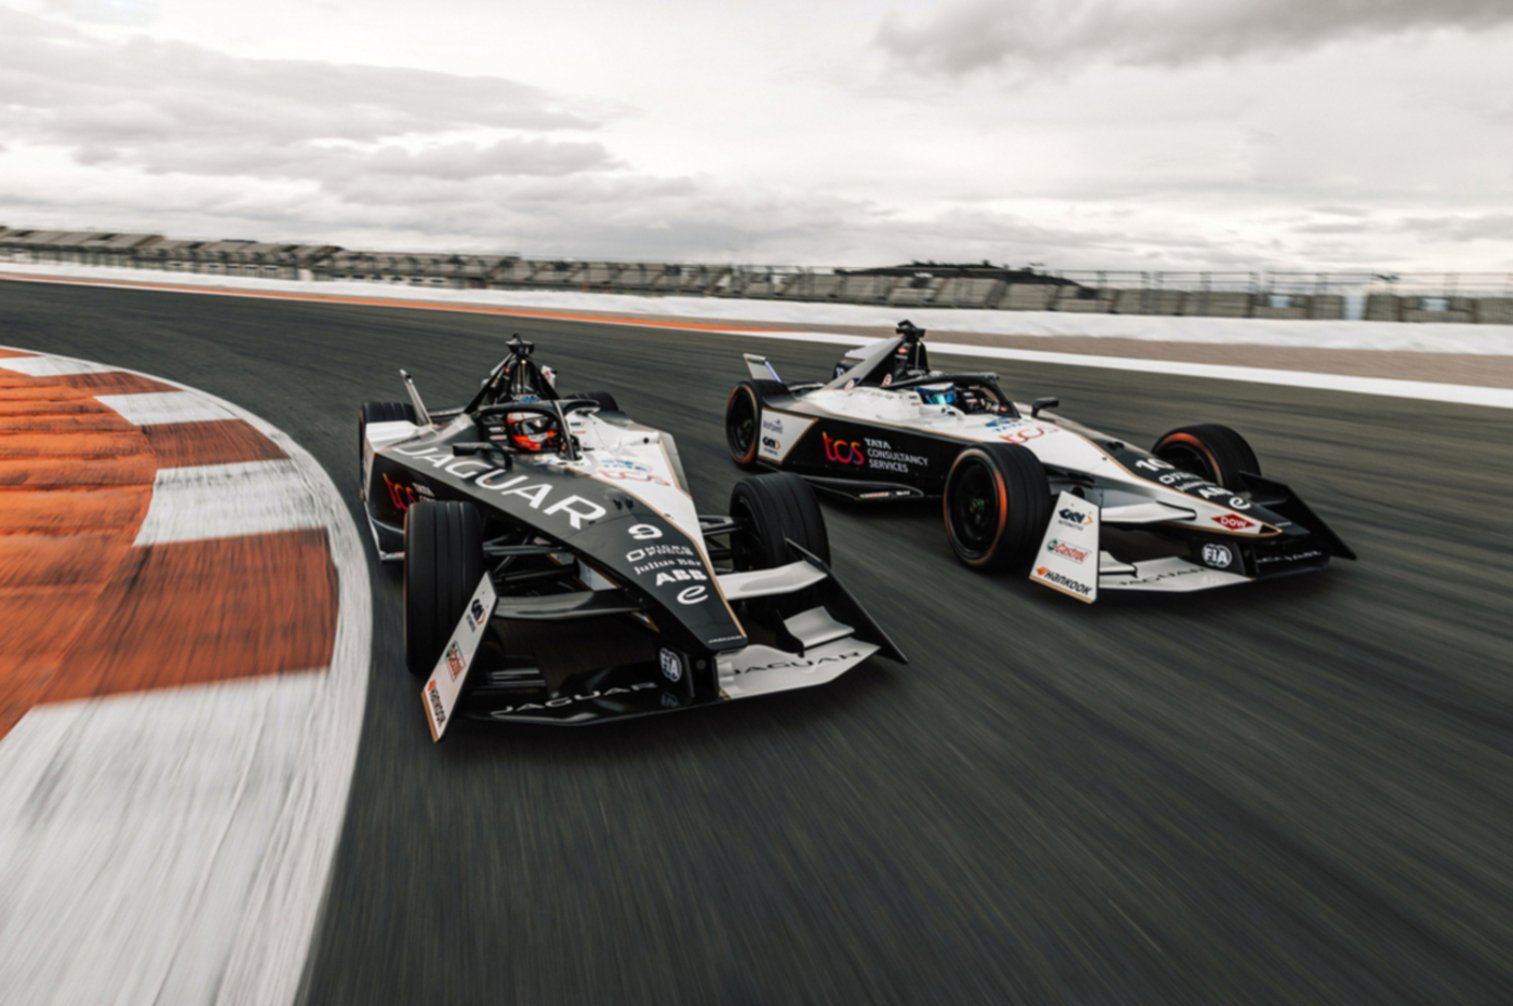 JAGUAR TCS RACING READY TO TAKE TO THE TRACK IN MEXICO CITY FOR A NEW ERA OF FORMULA E